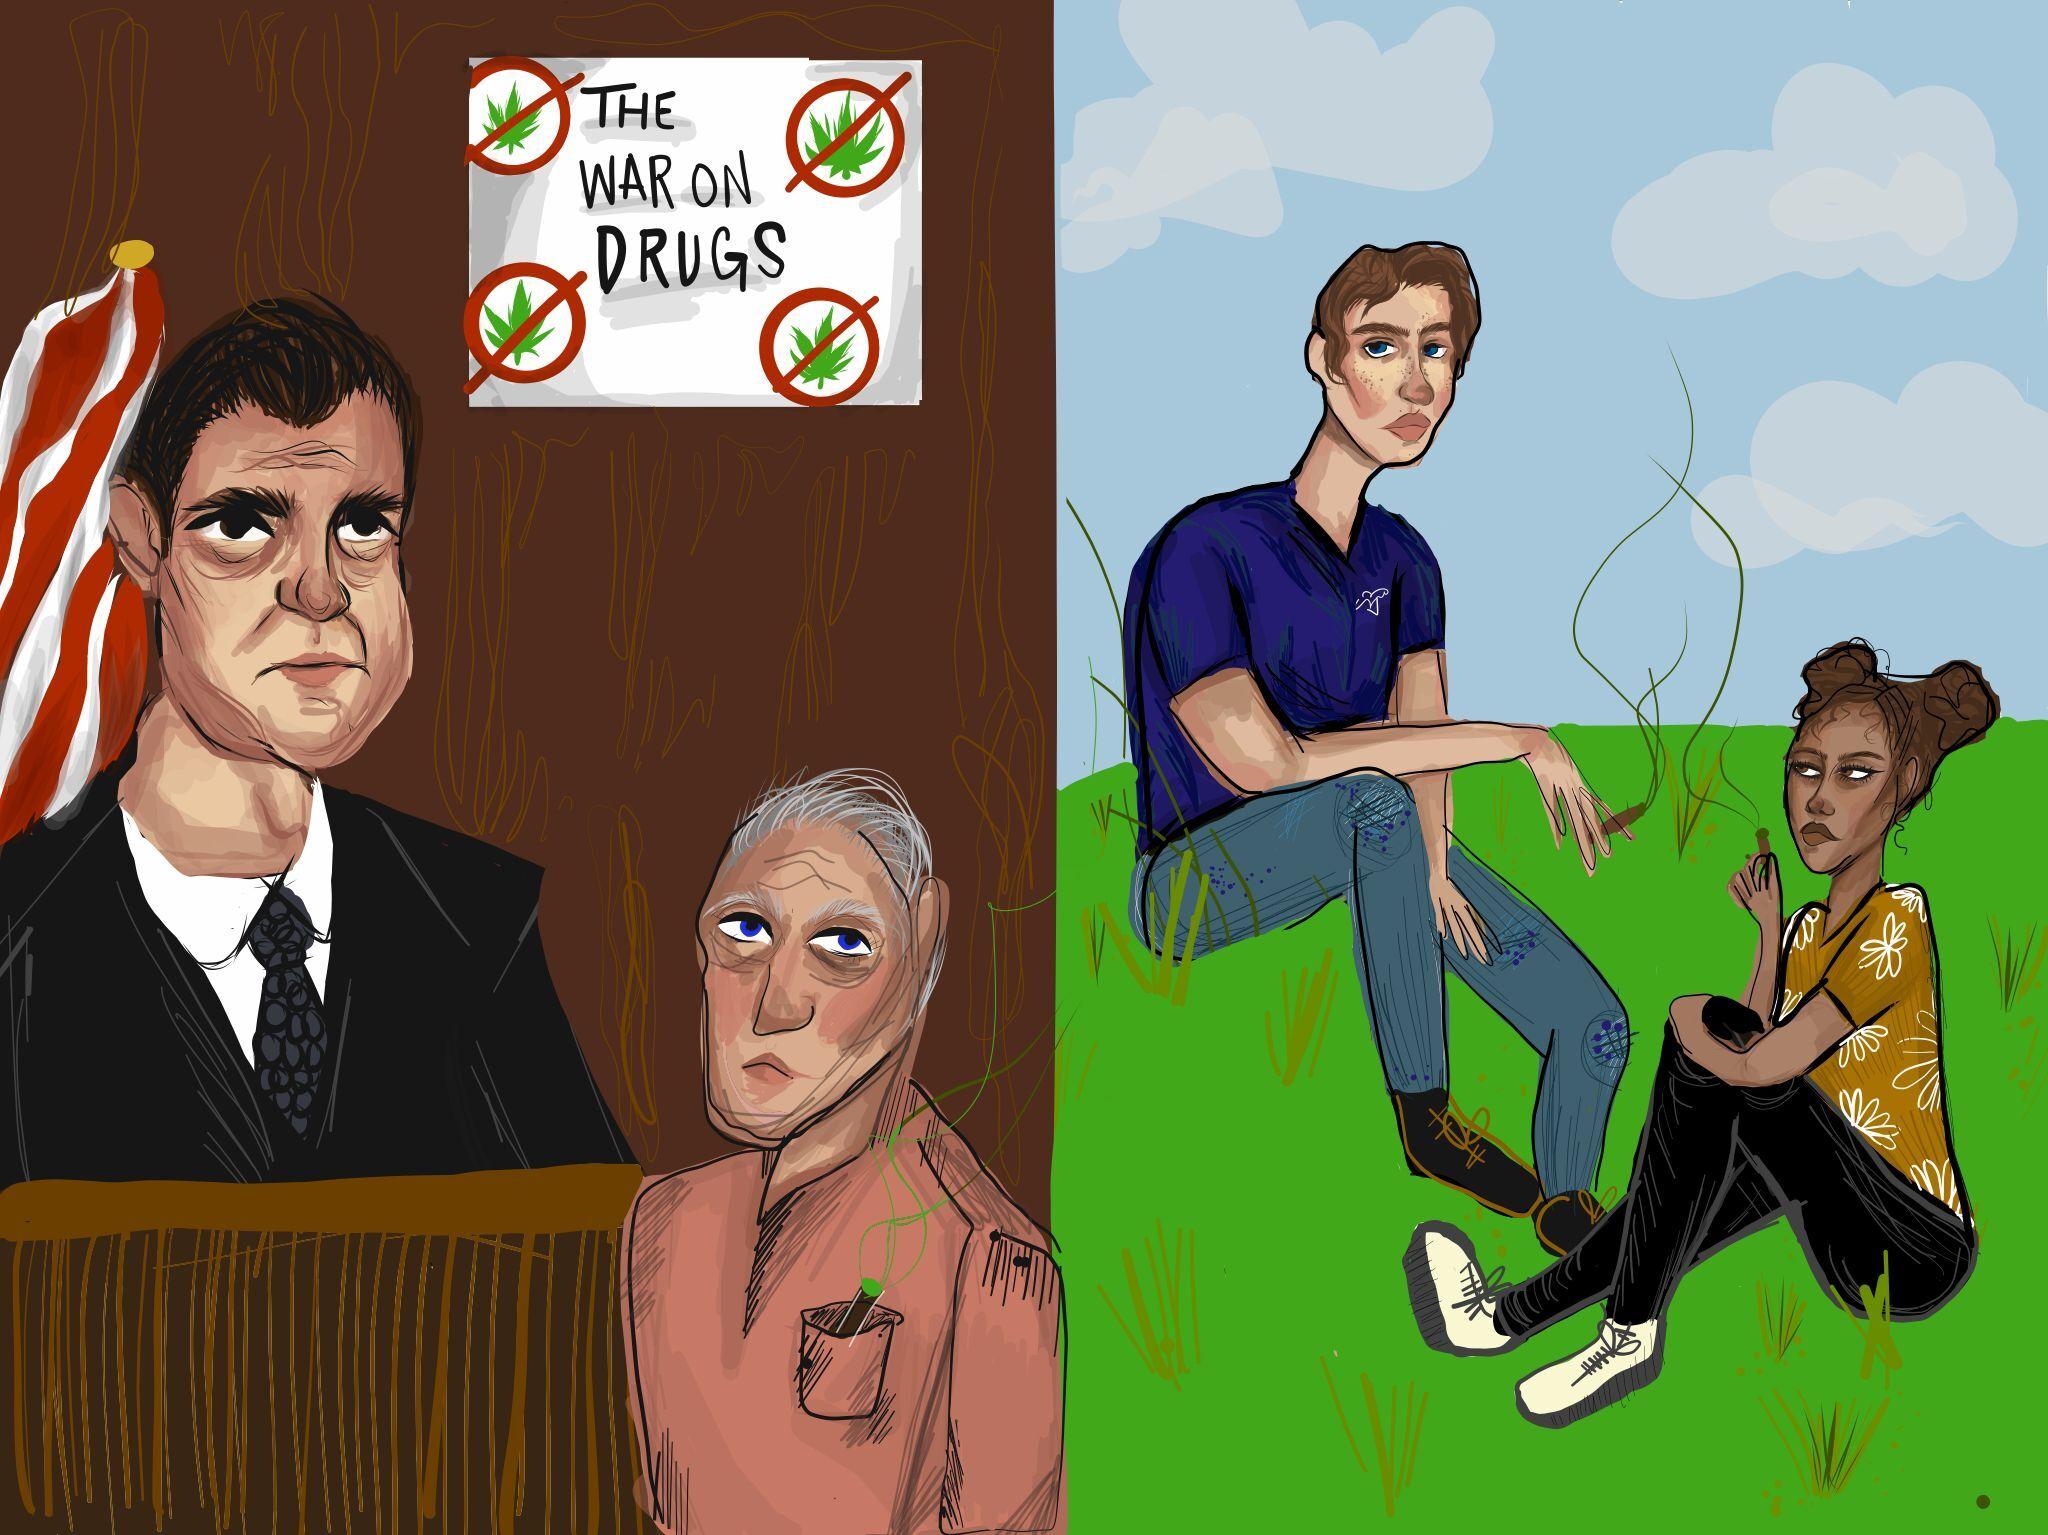 Graphic illustration depicting four figures, two boomers on the right (one resembling nixon) and two student/millenial figures on the right smoking joints